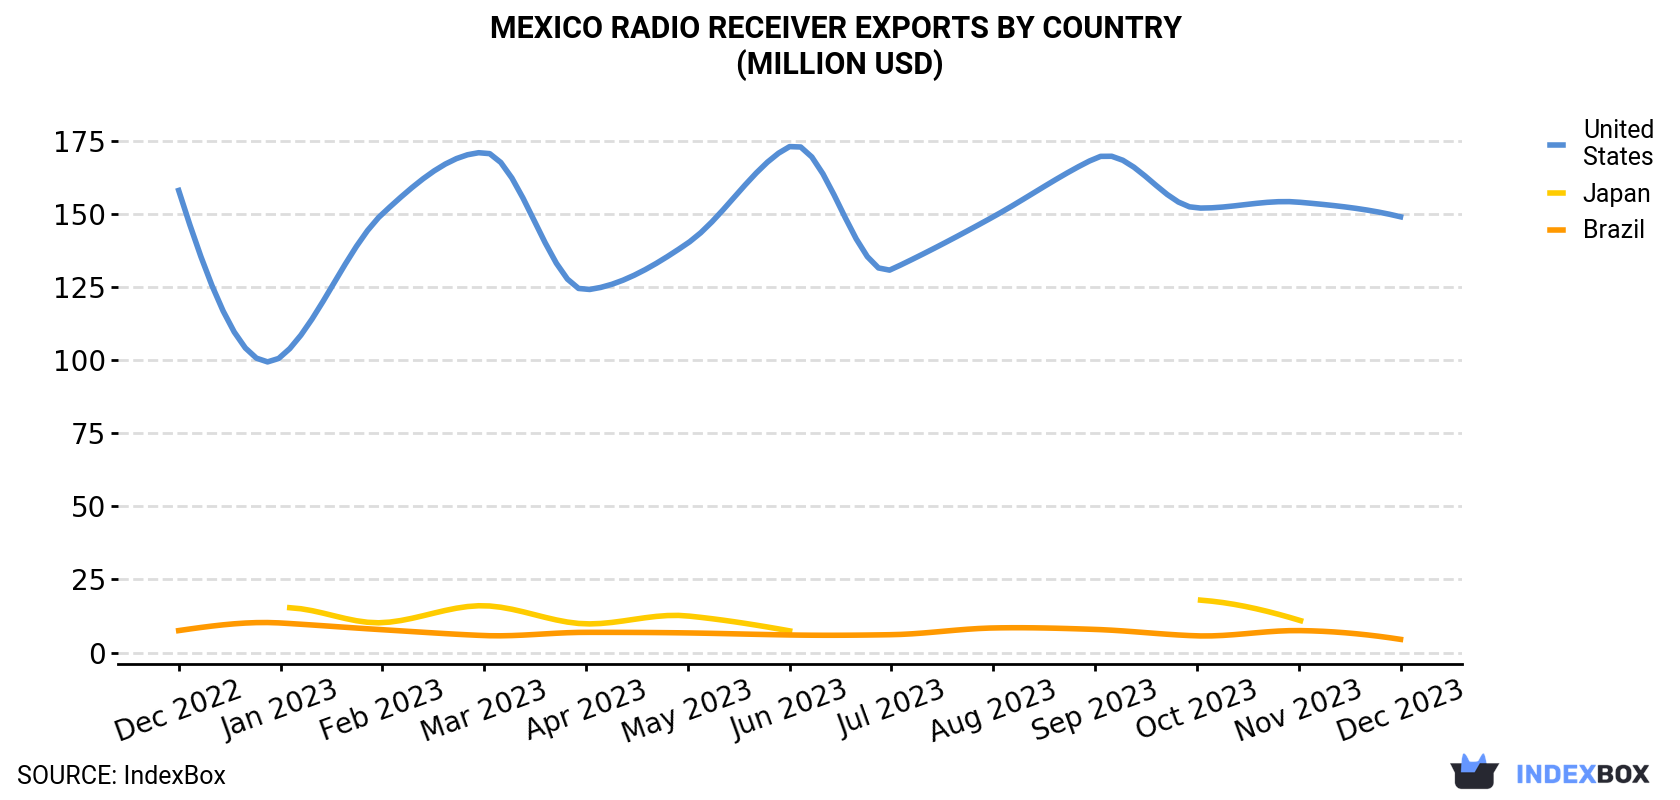 Mexico Radio Receiver Exports By Country (Million USD)